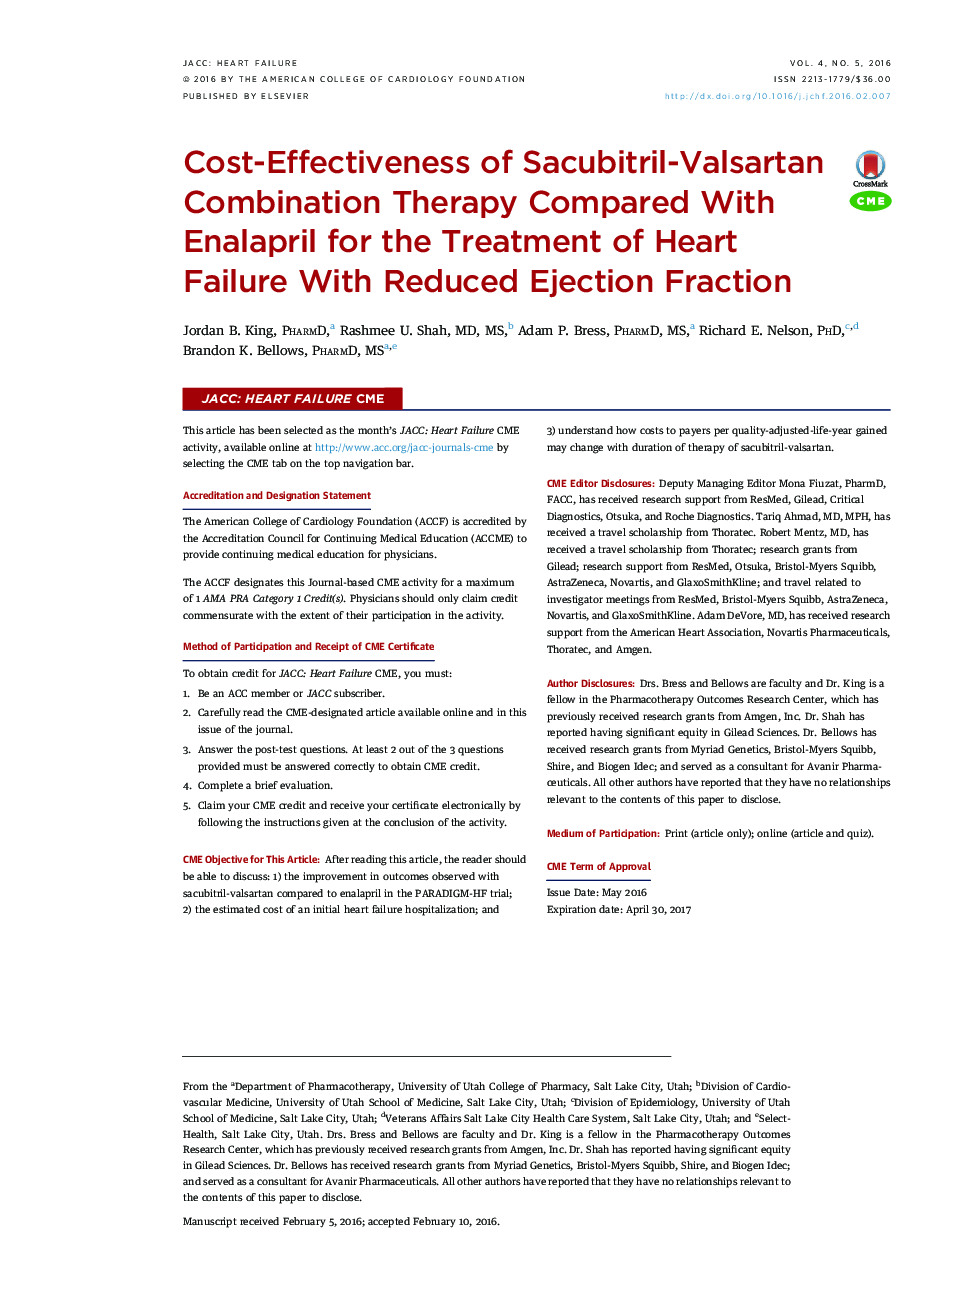 Cost-Effectiveness of Sacubitril-Valsartan Combination Therapy Compared With Enalapril for the Treatment of Heart Failure With Reduced Ejection Fraction 